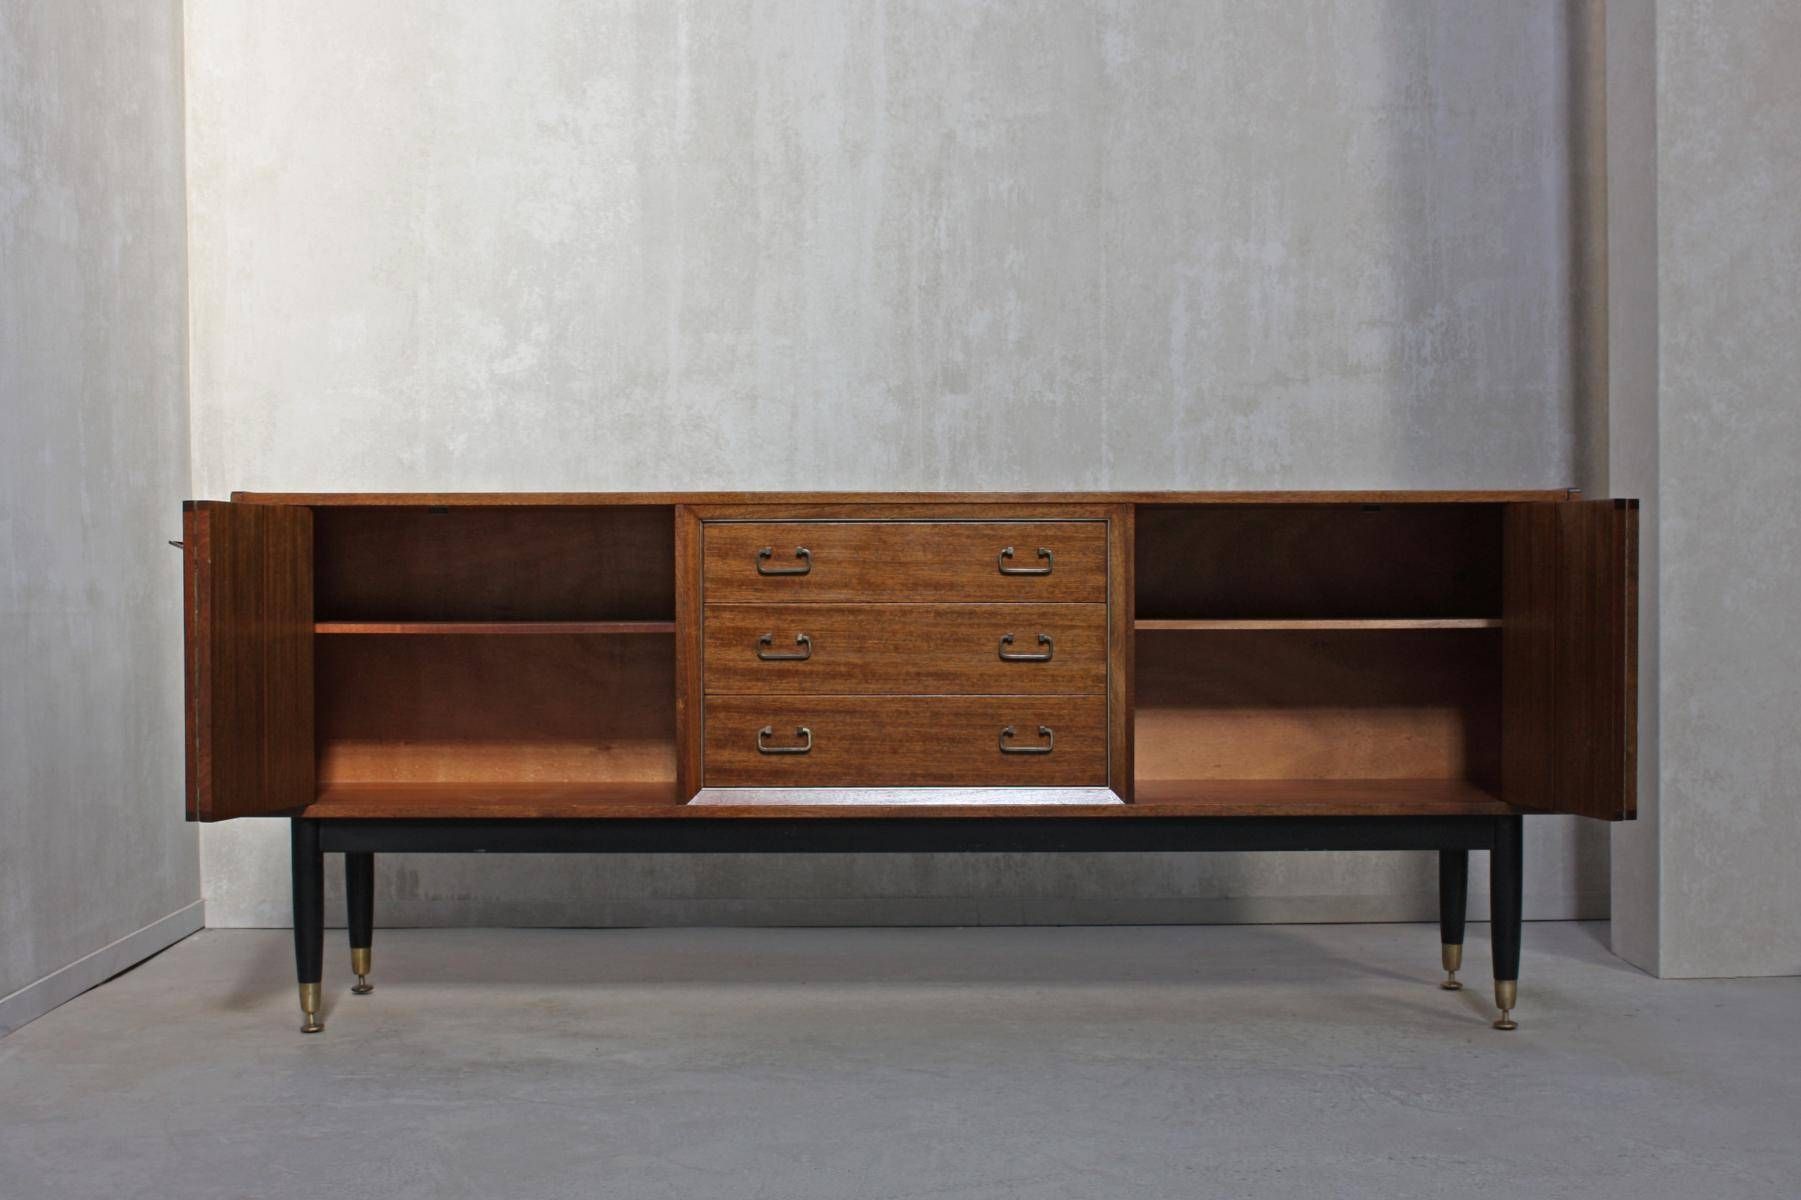 Vintage Sideboard From G Plan, 1950s For Sale At Pamono Intended For Most Current G Plan Vintage Sideboards (View 10 of 15)